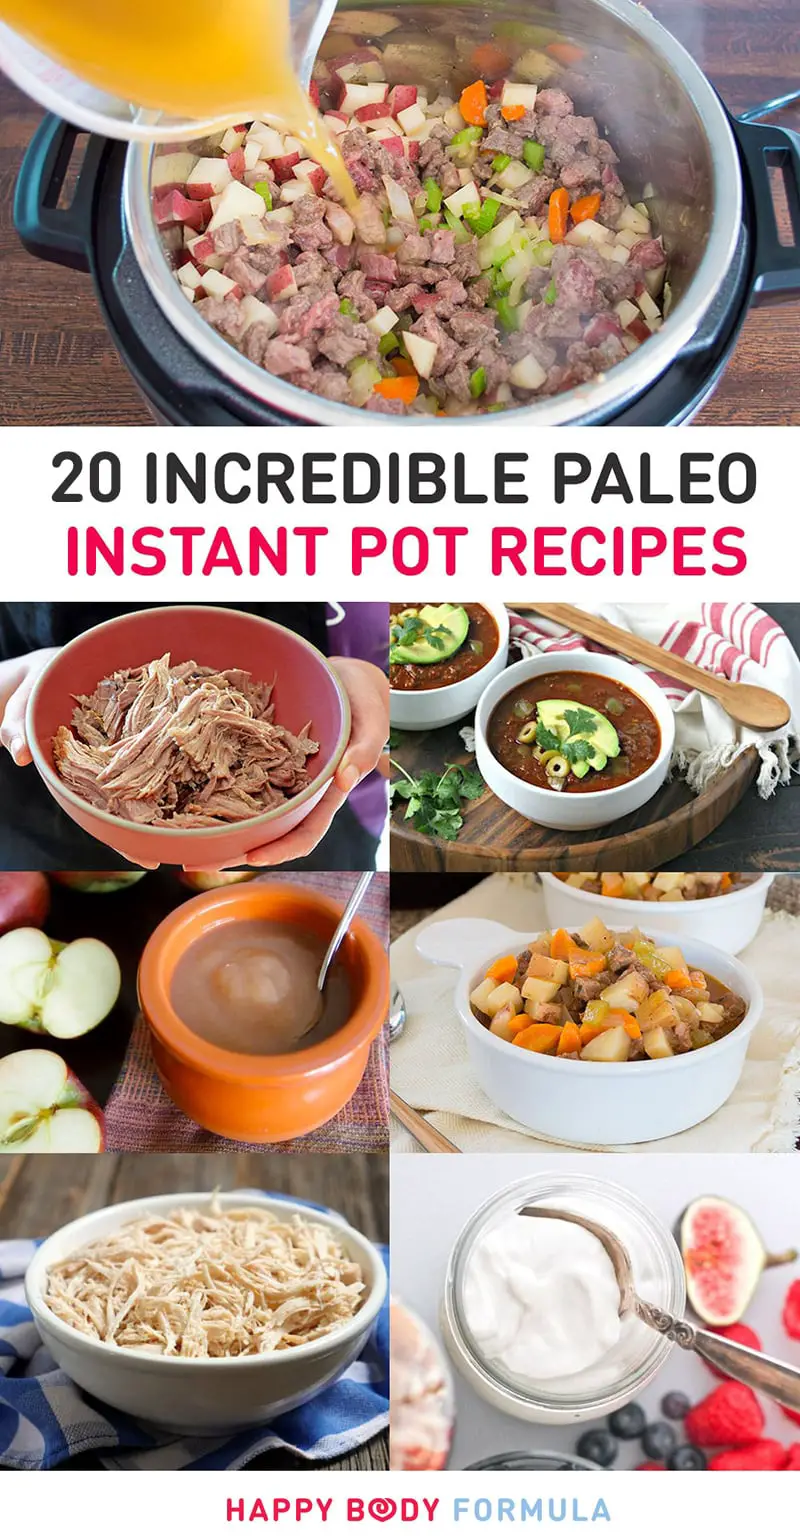 12 Incredible & Simple Paleo Instant Pot Recipes